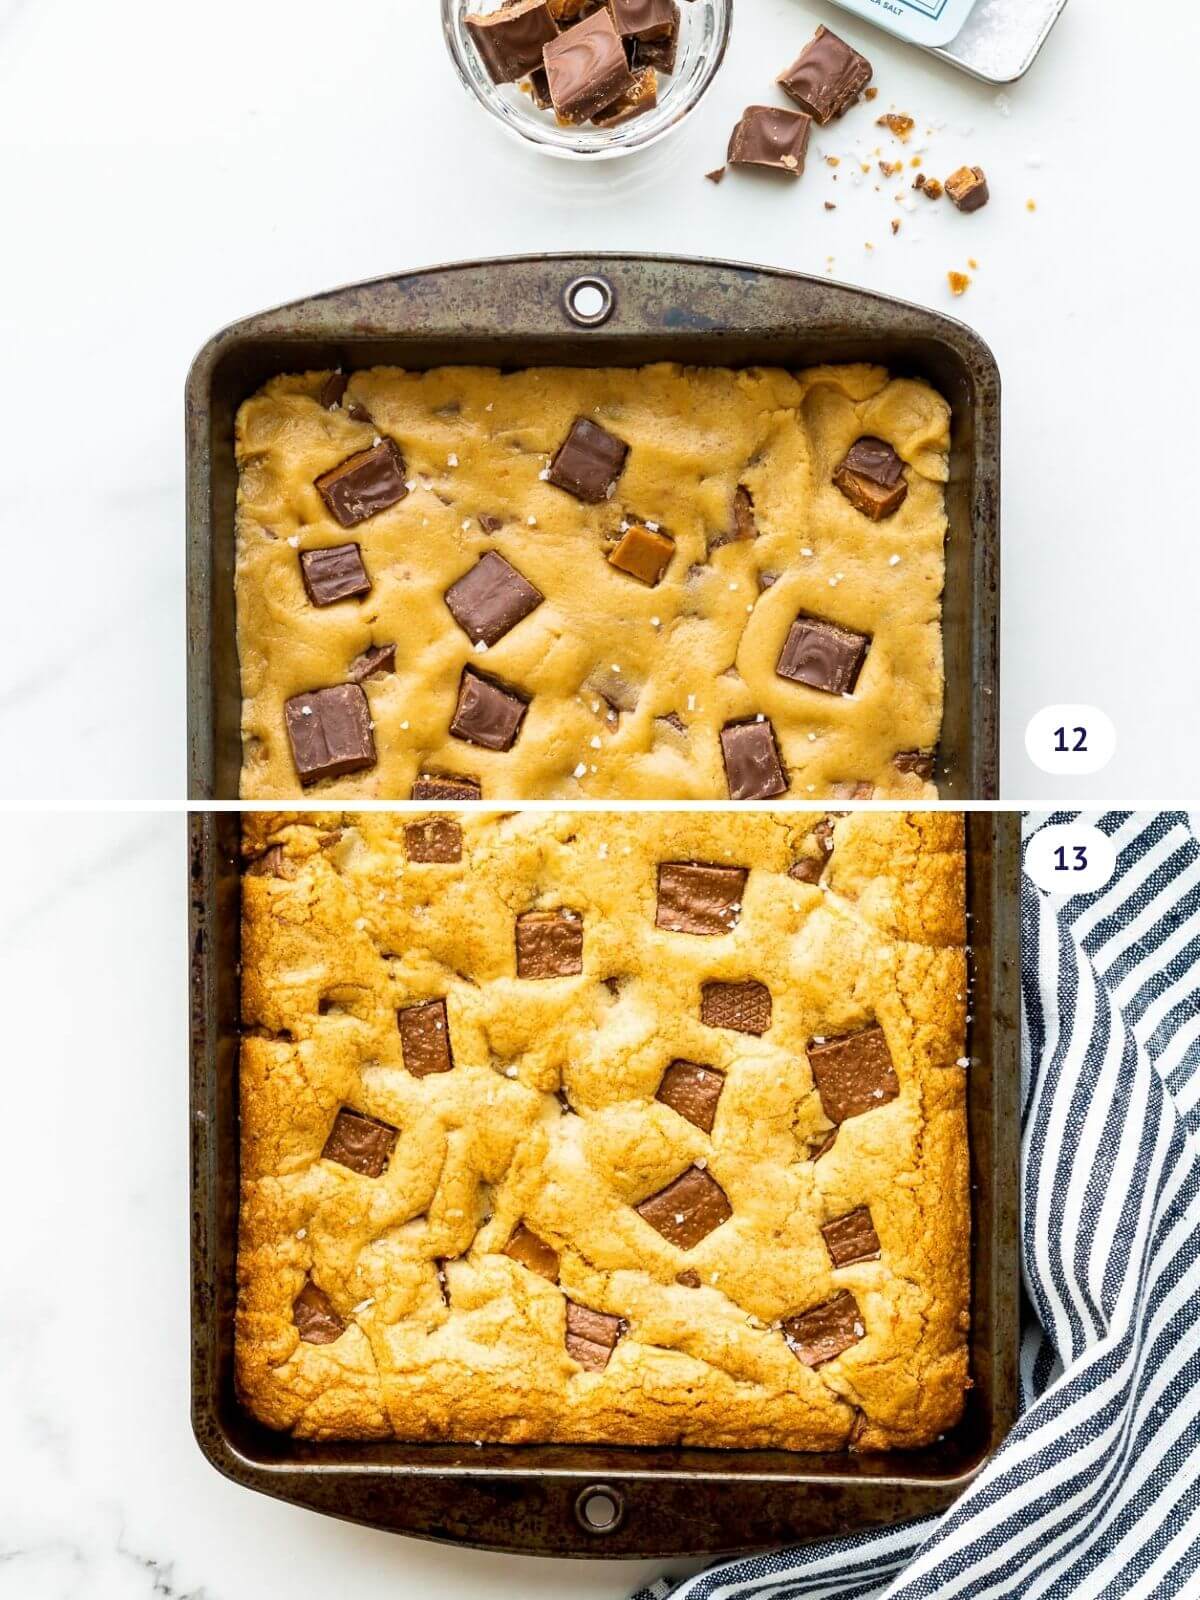 Blondie bars before and after baking.